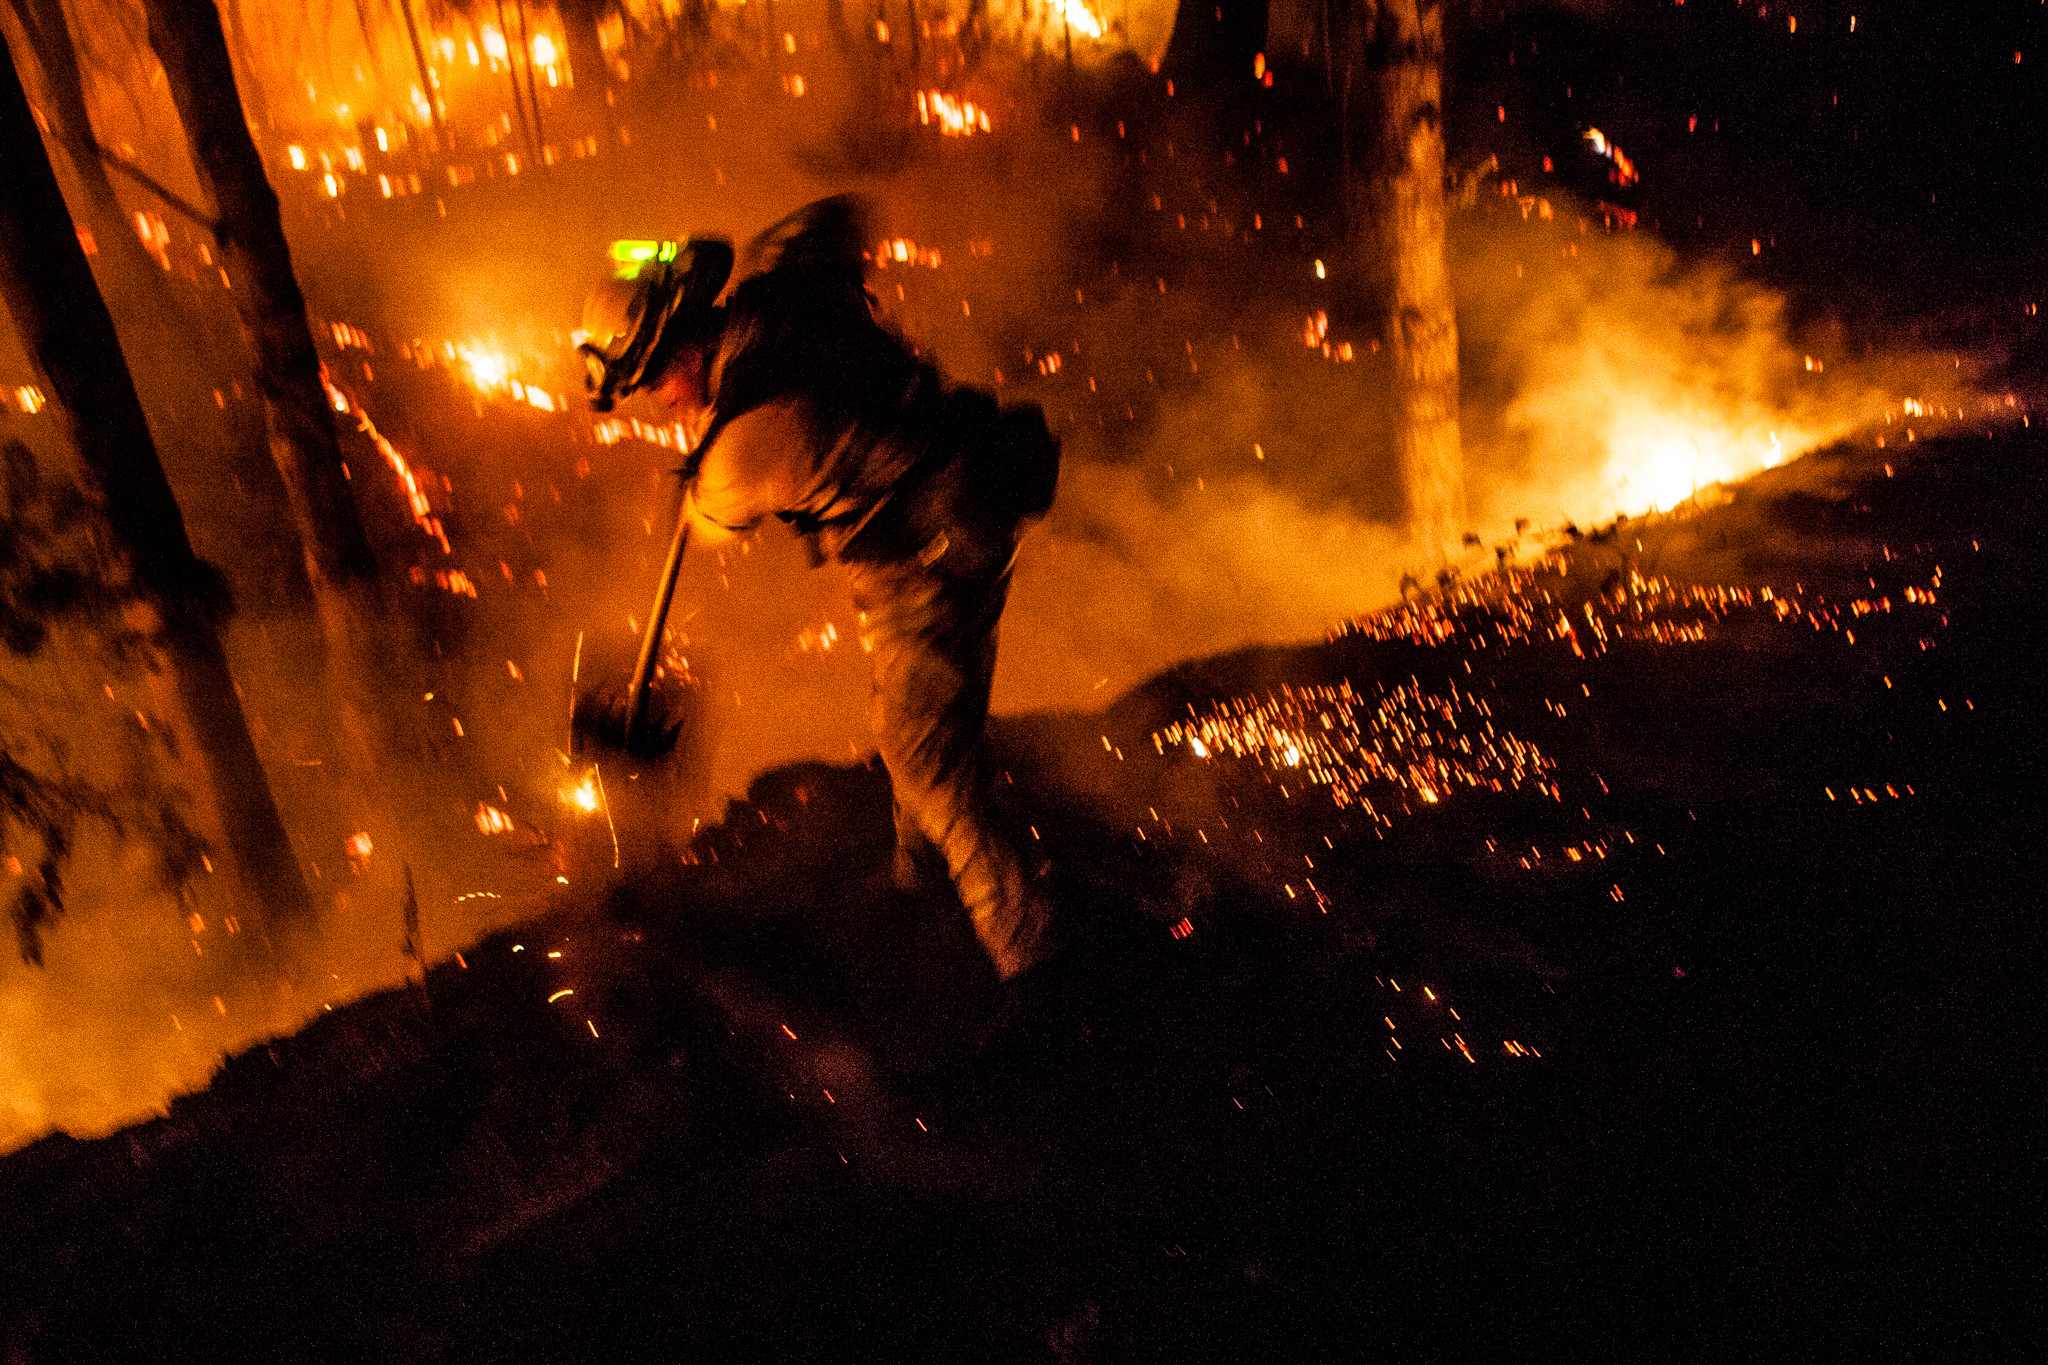  Firefighter Dave Beck rakes embers away from a road on the Rim Fire near Buck Meadows, California, August 22, 2013. The fire burned 257,314 acres in and around Yosemite National Park, and is the biggest wildfire on record in the Sierra Nevada. 